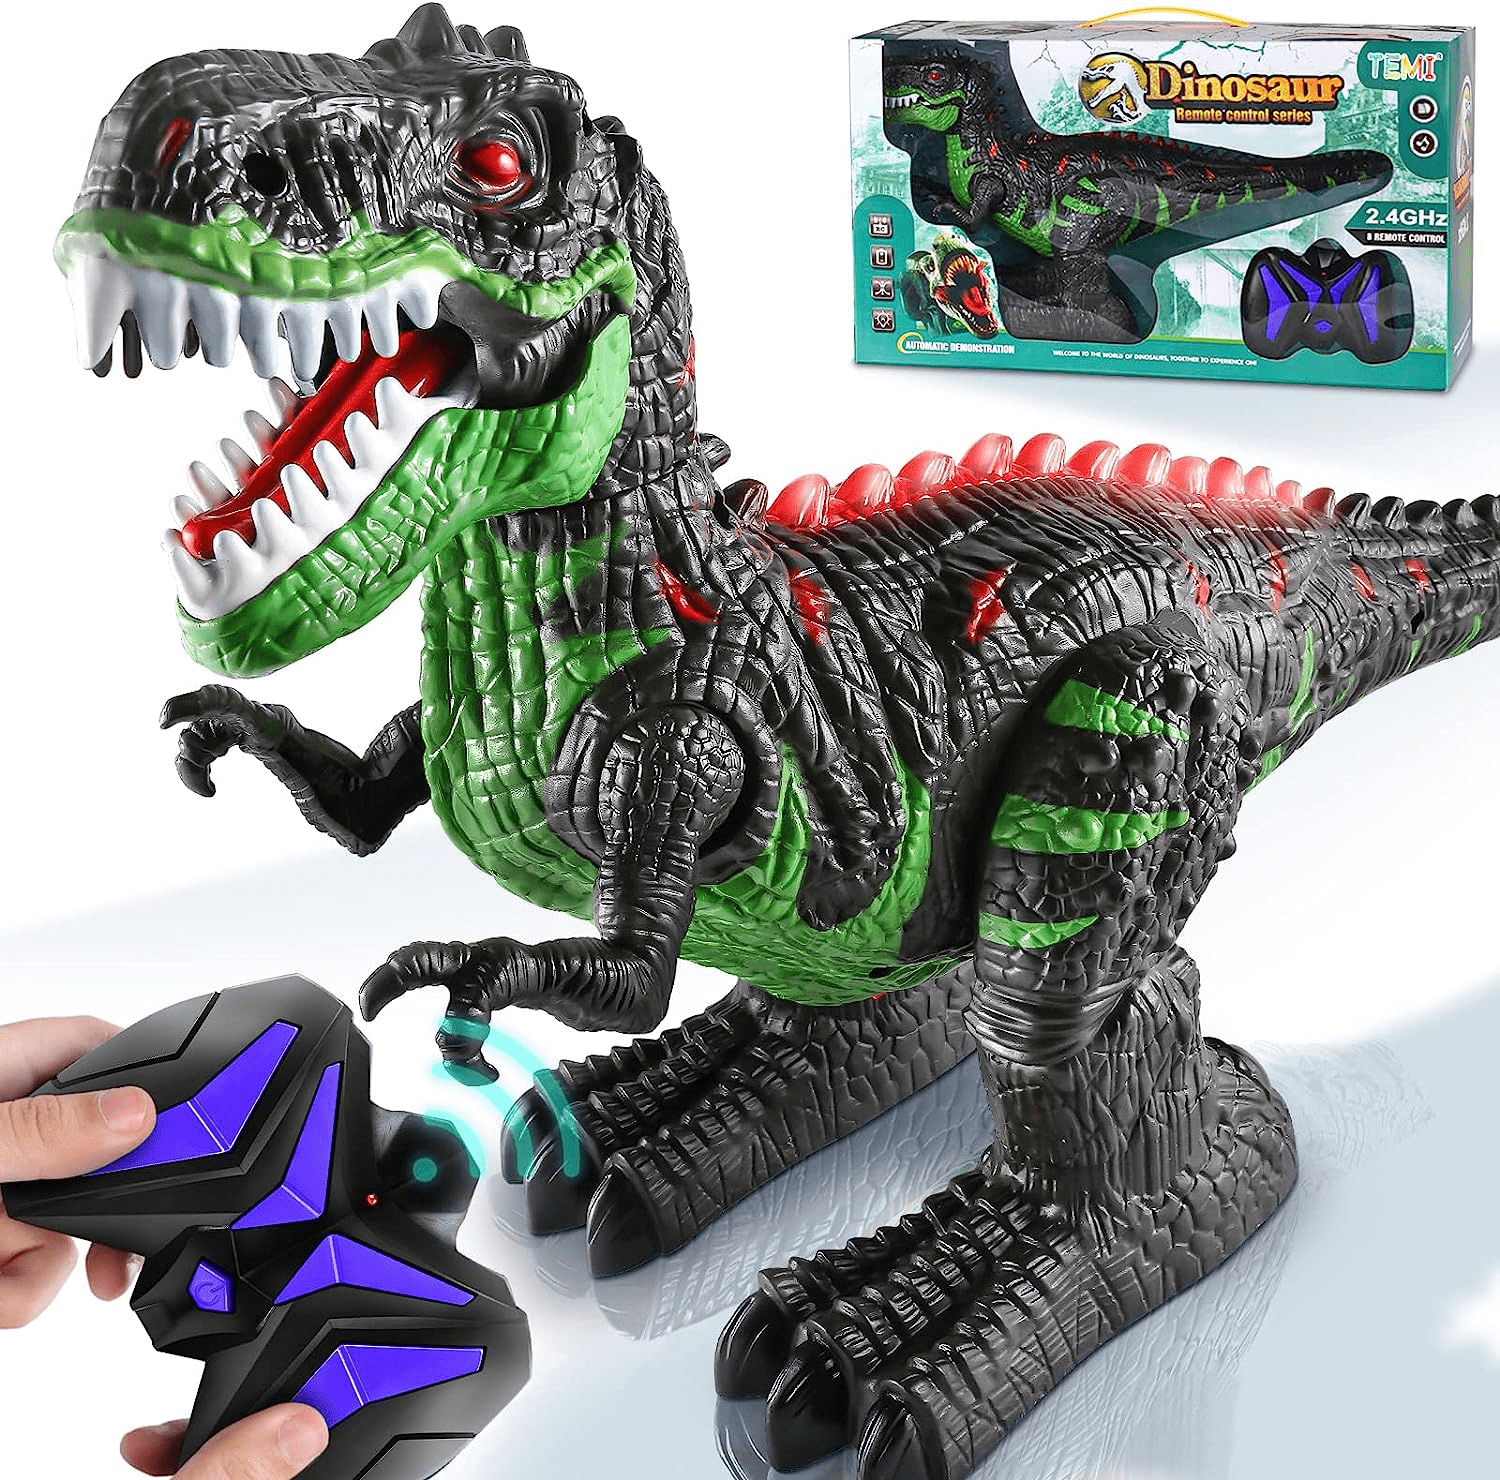 8 Channels 2.4G Remote Control T-rex Dinosaur Toy for Kids 4-7